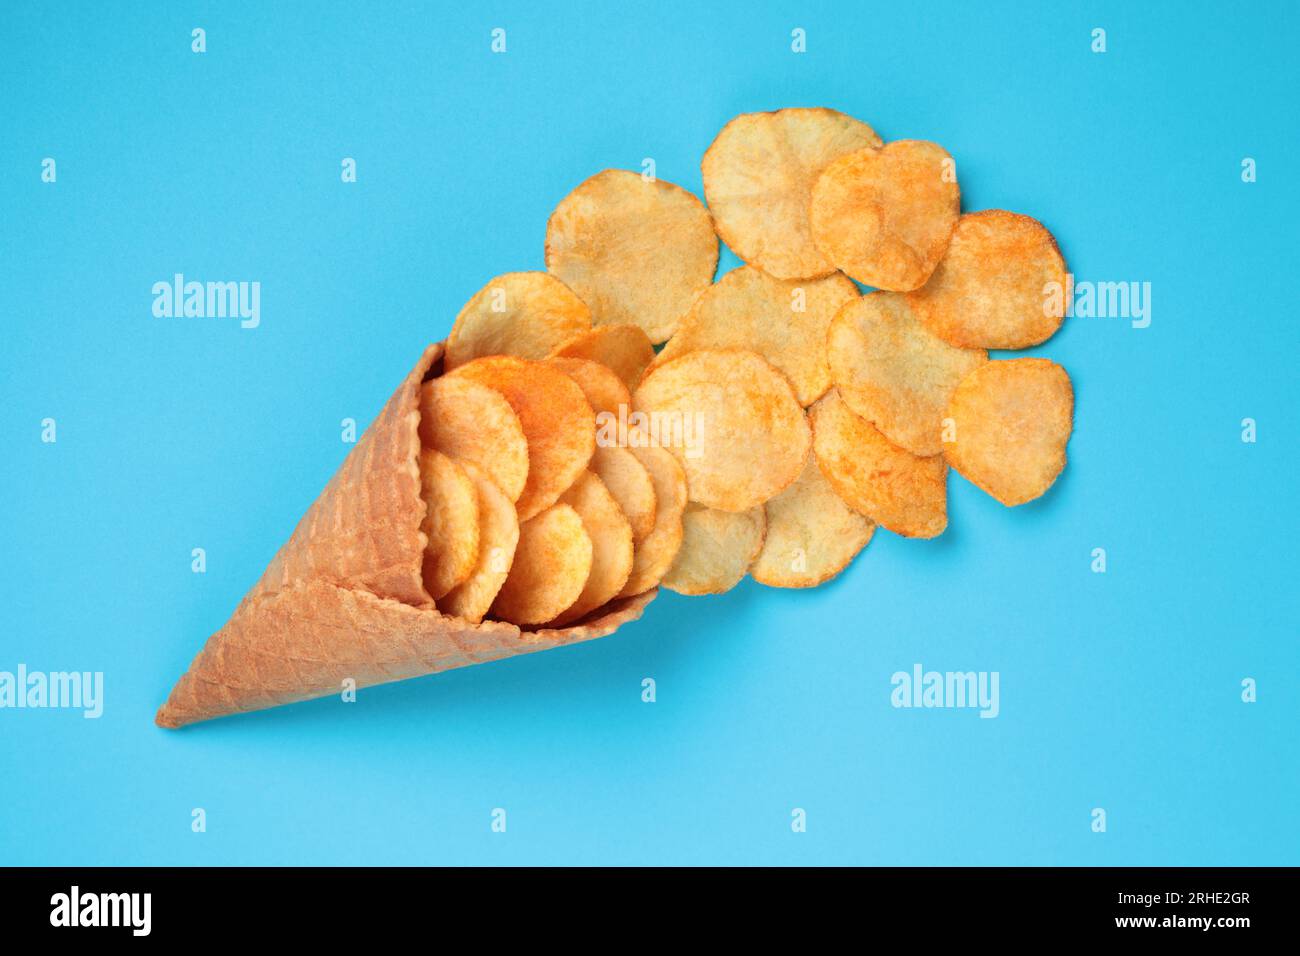 Waffle Cone with Potato Chips on blue background. Fast Food concept close-up Stock Photo